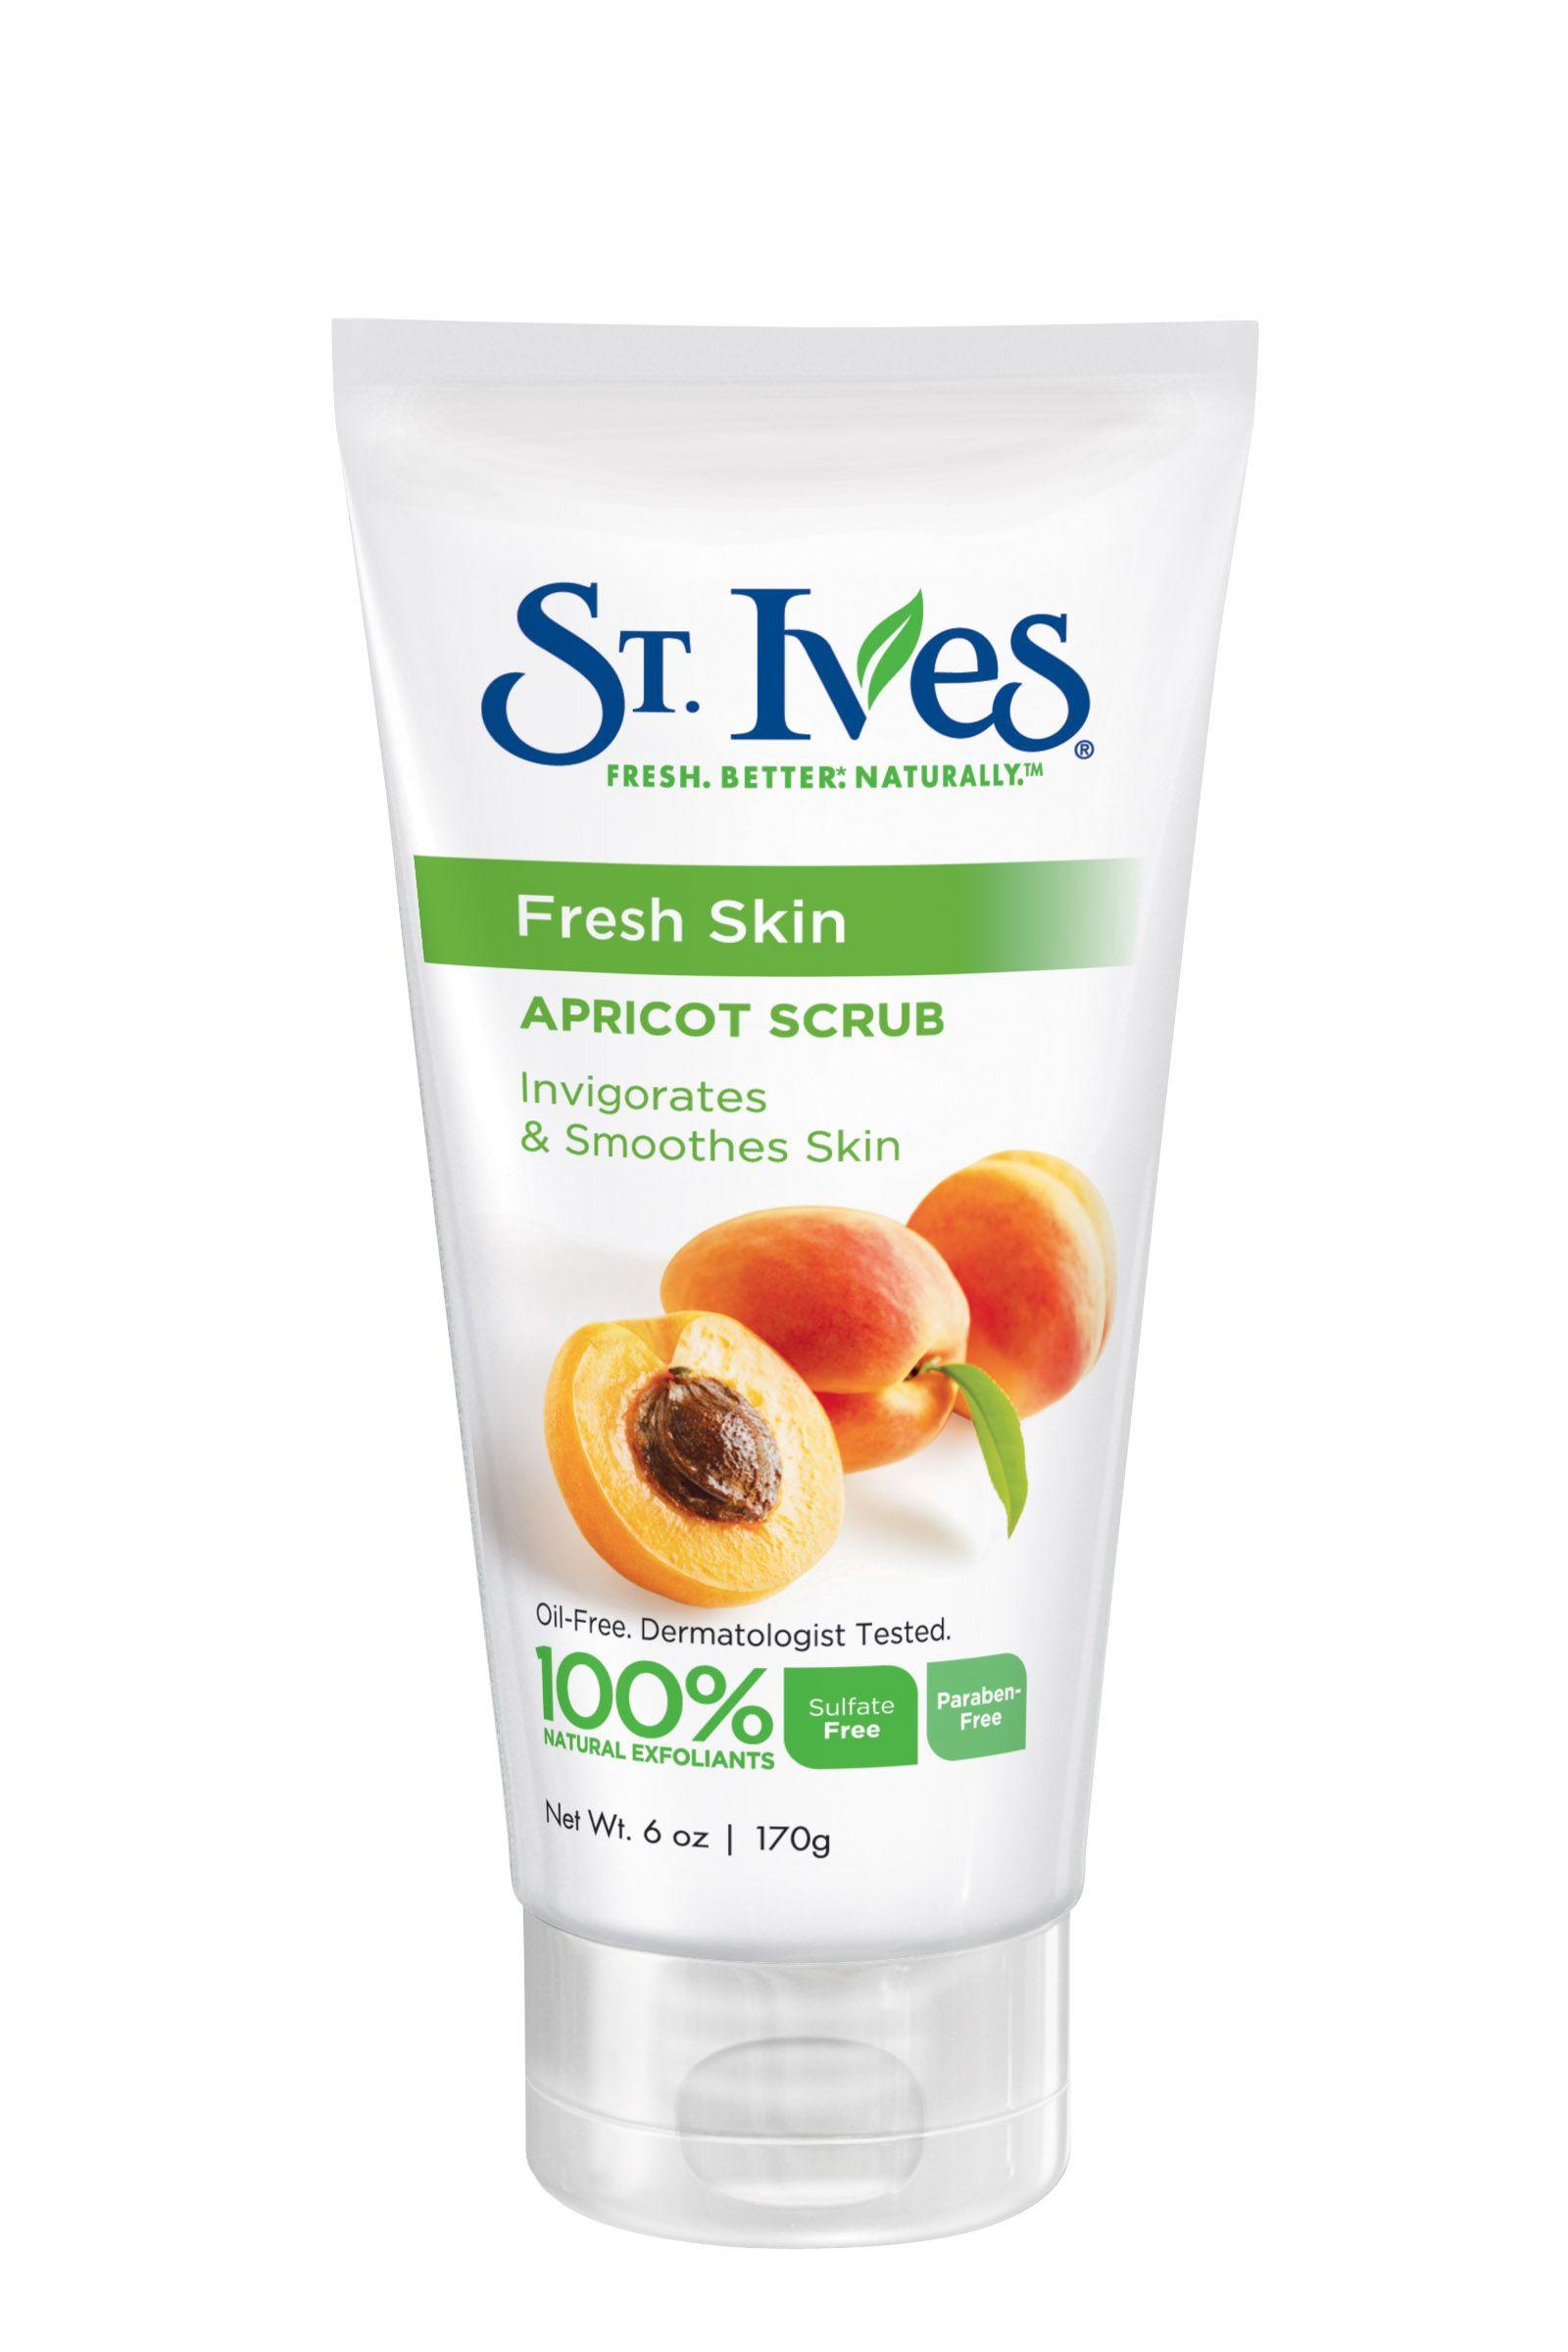 Ives facial products Homepage